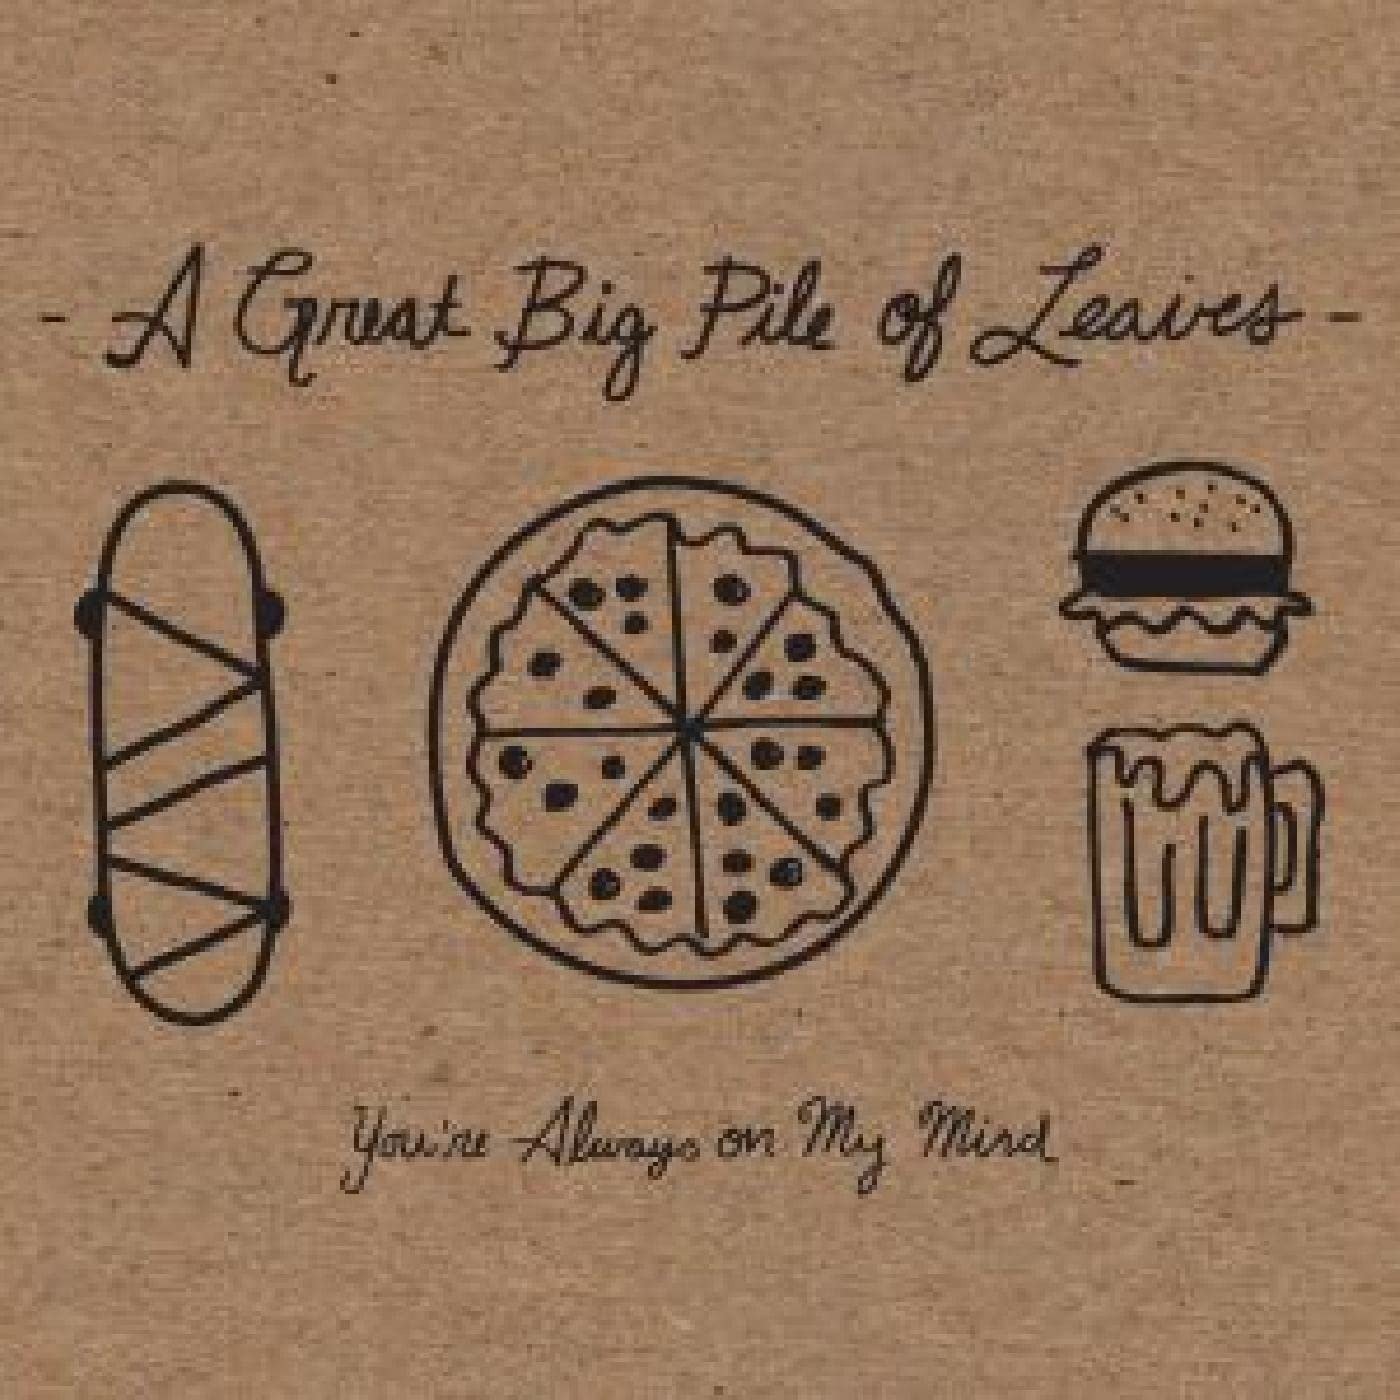 CD Shop - A GREAT BIG PILE OF LEAVE YOU\